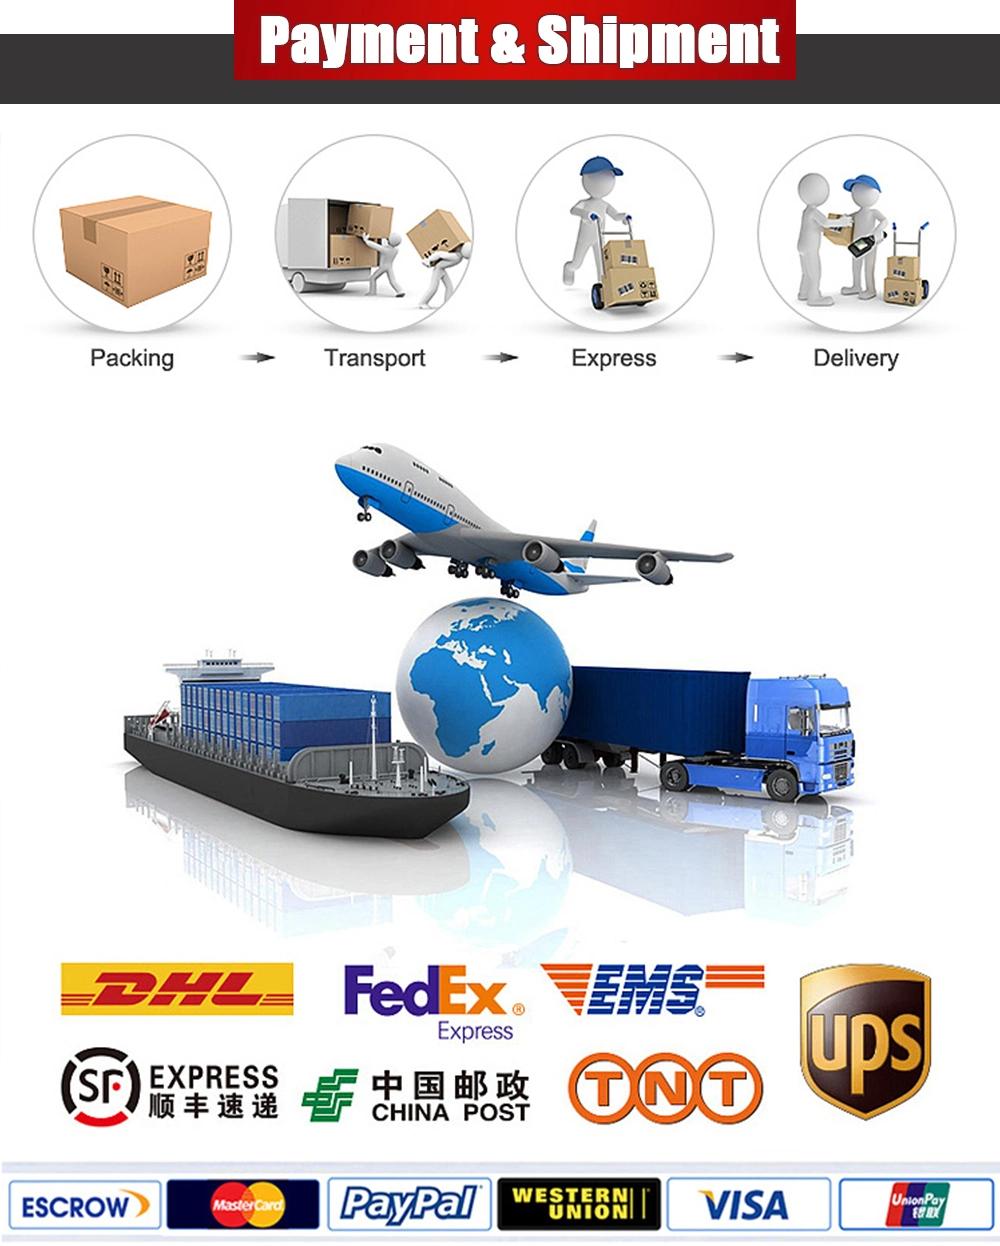 Industrial Optical Fiber/CO2/UV Flying Non-Standard Laser Marking Printer Equipment Machine with Visual Positioning System